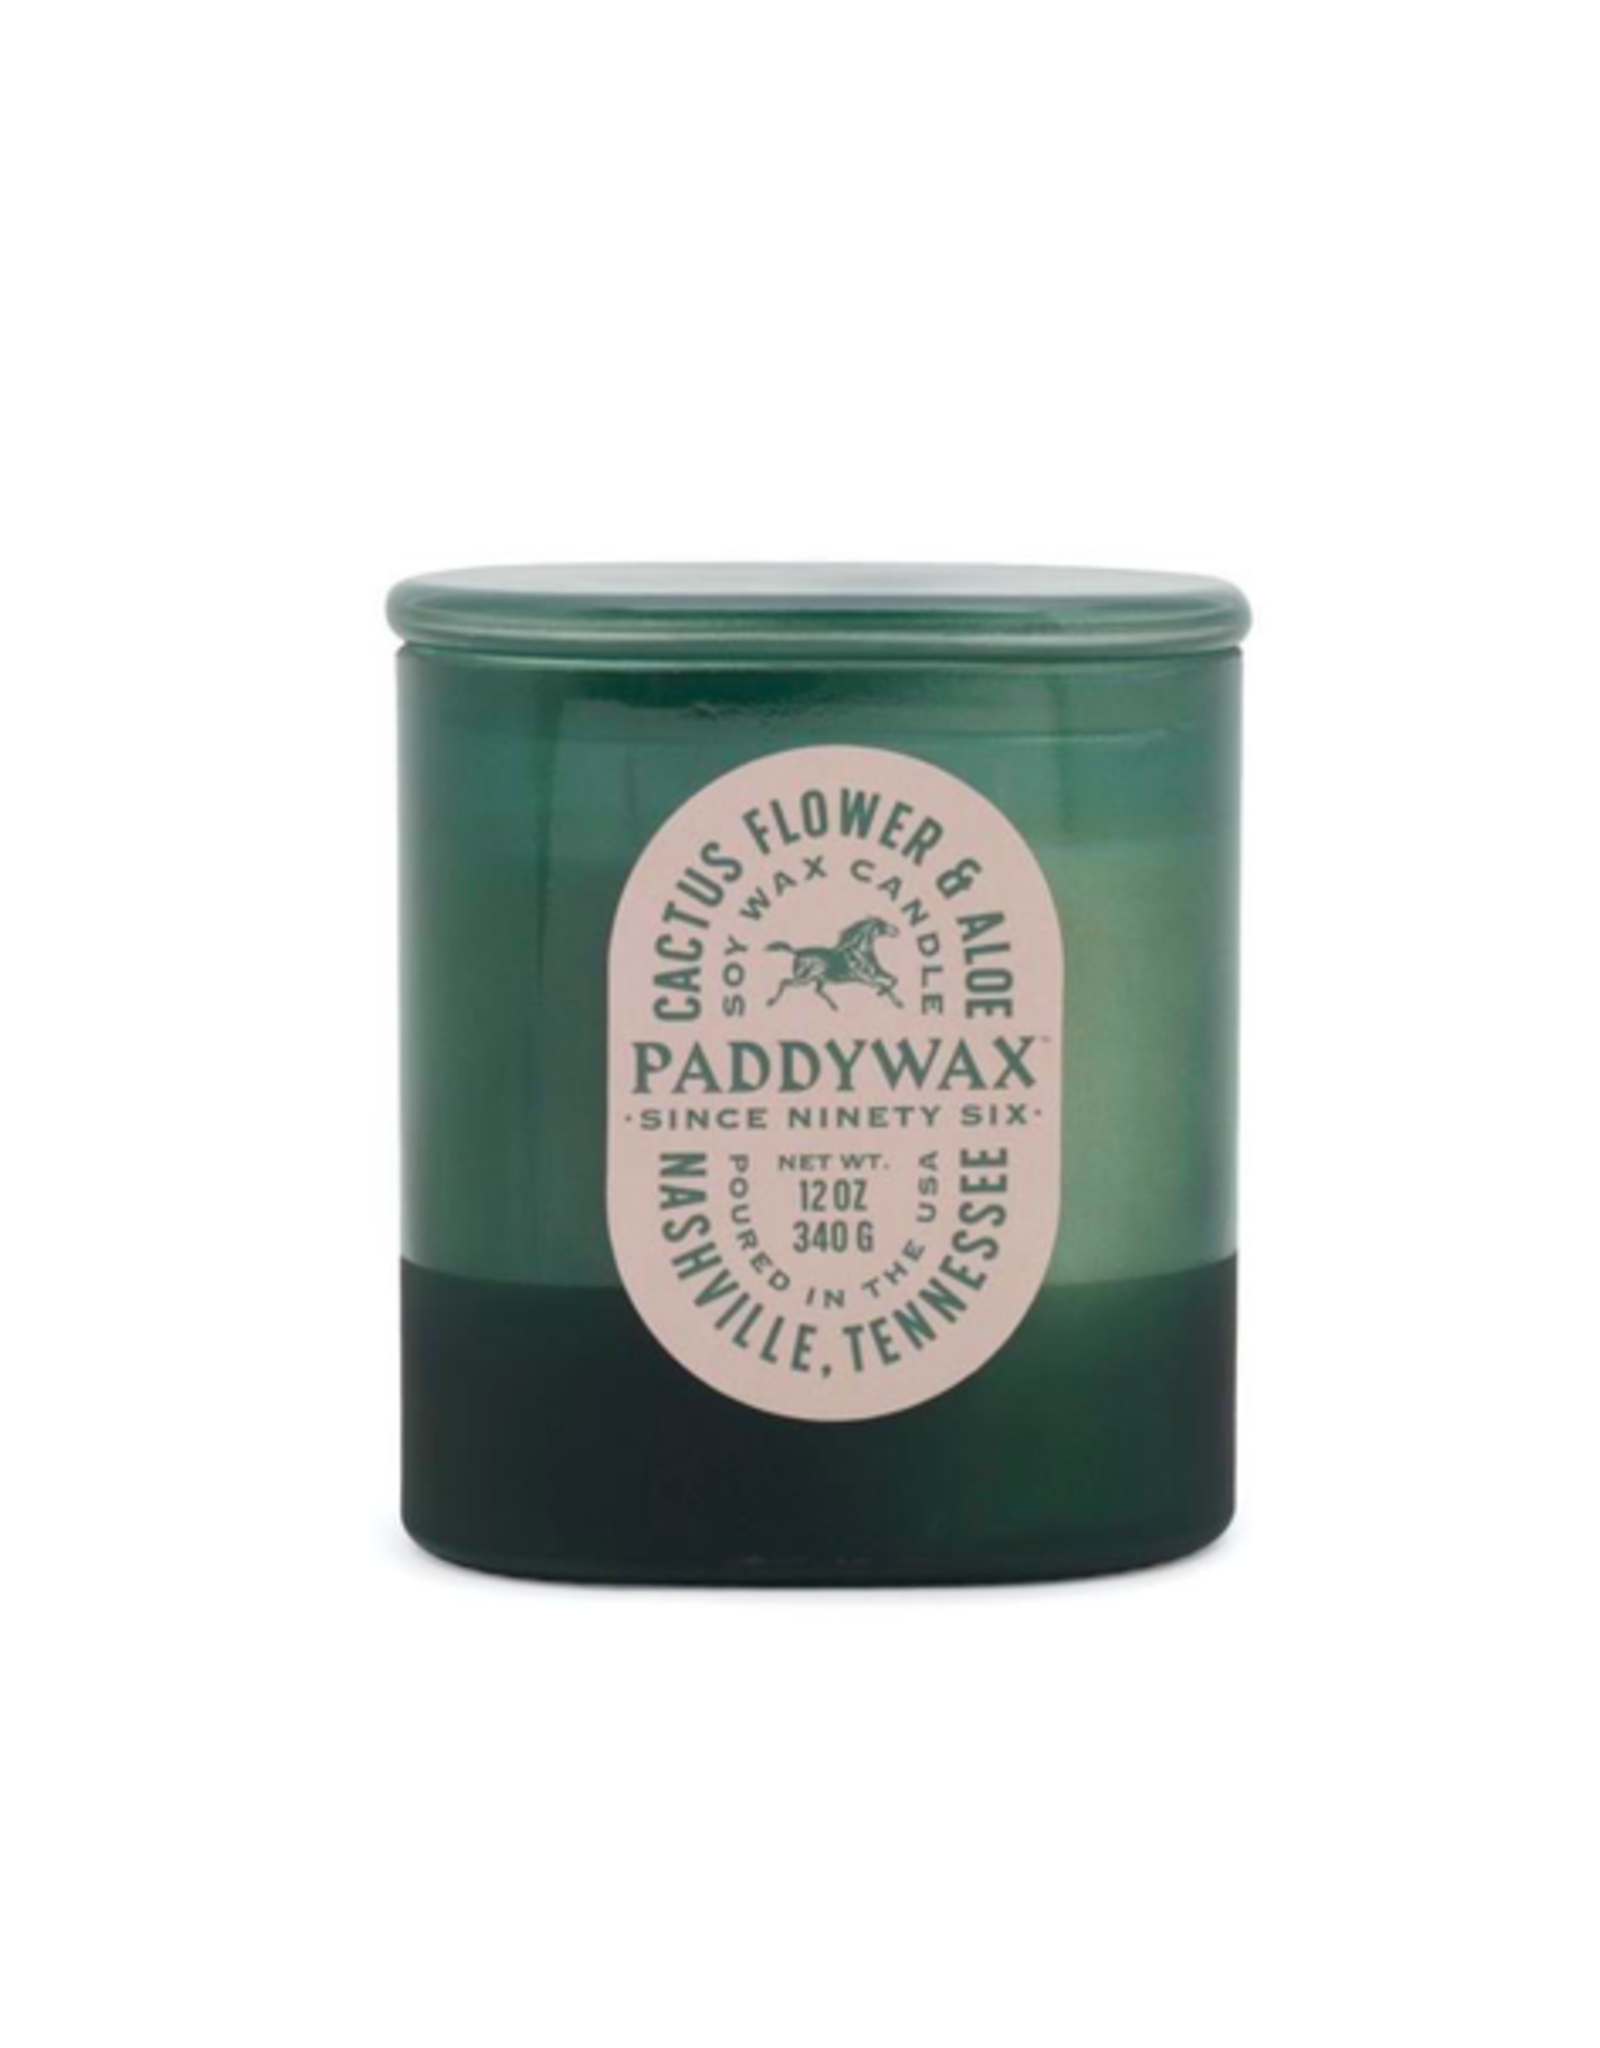 PAX - Soy Candle / Cactus Flower & Aloe, Green Glass, 12oz